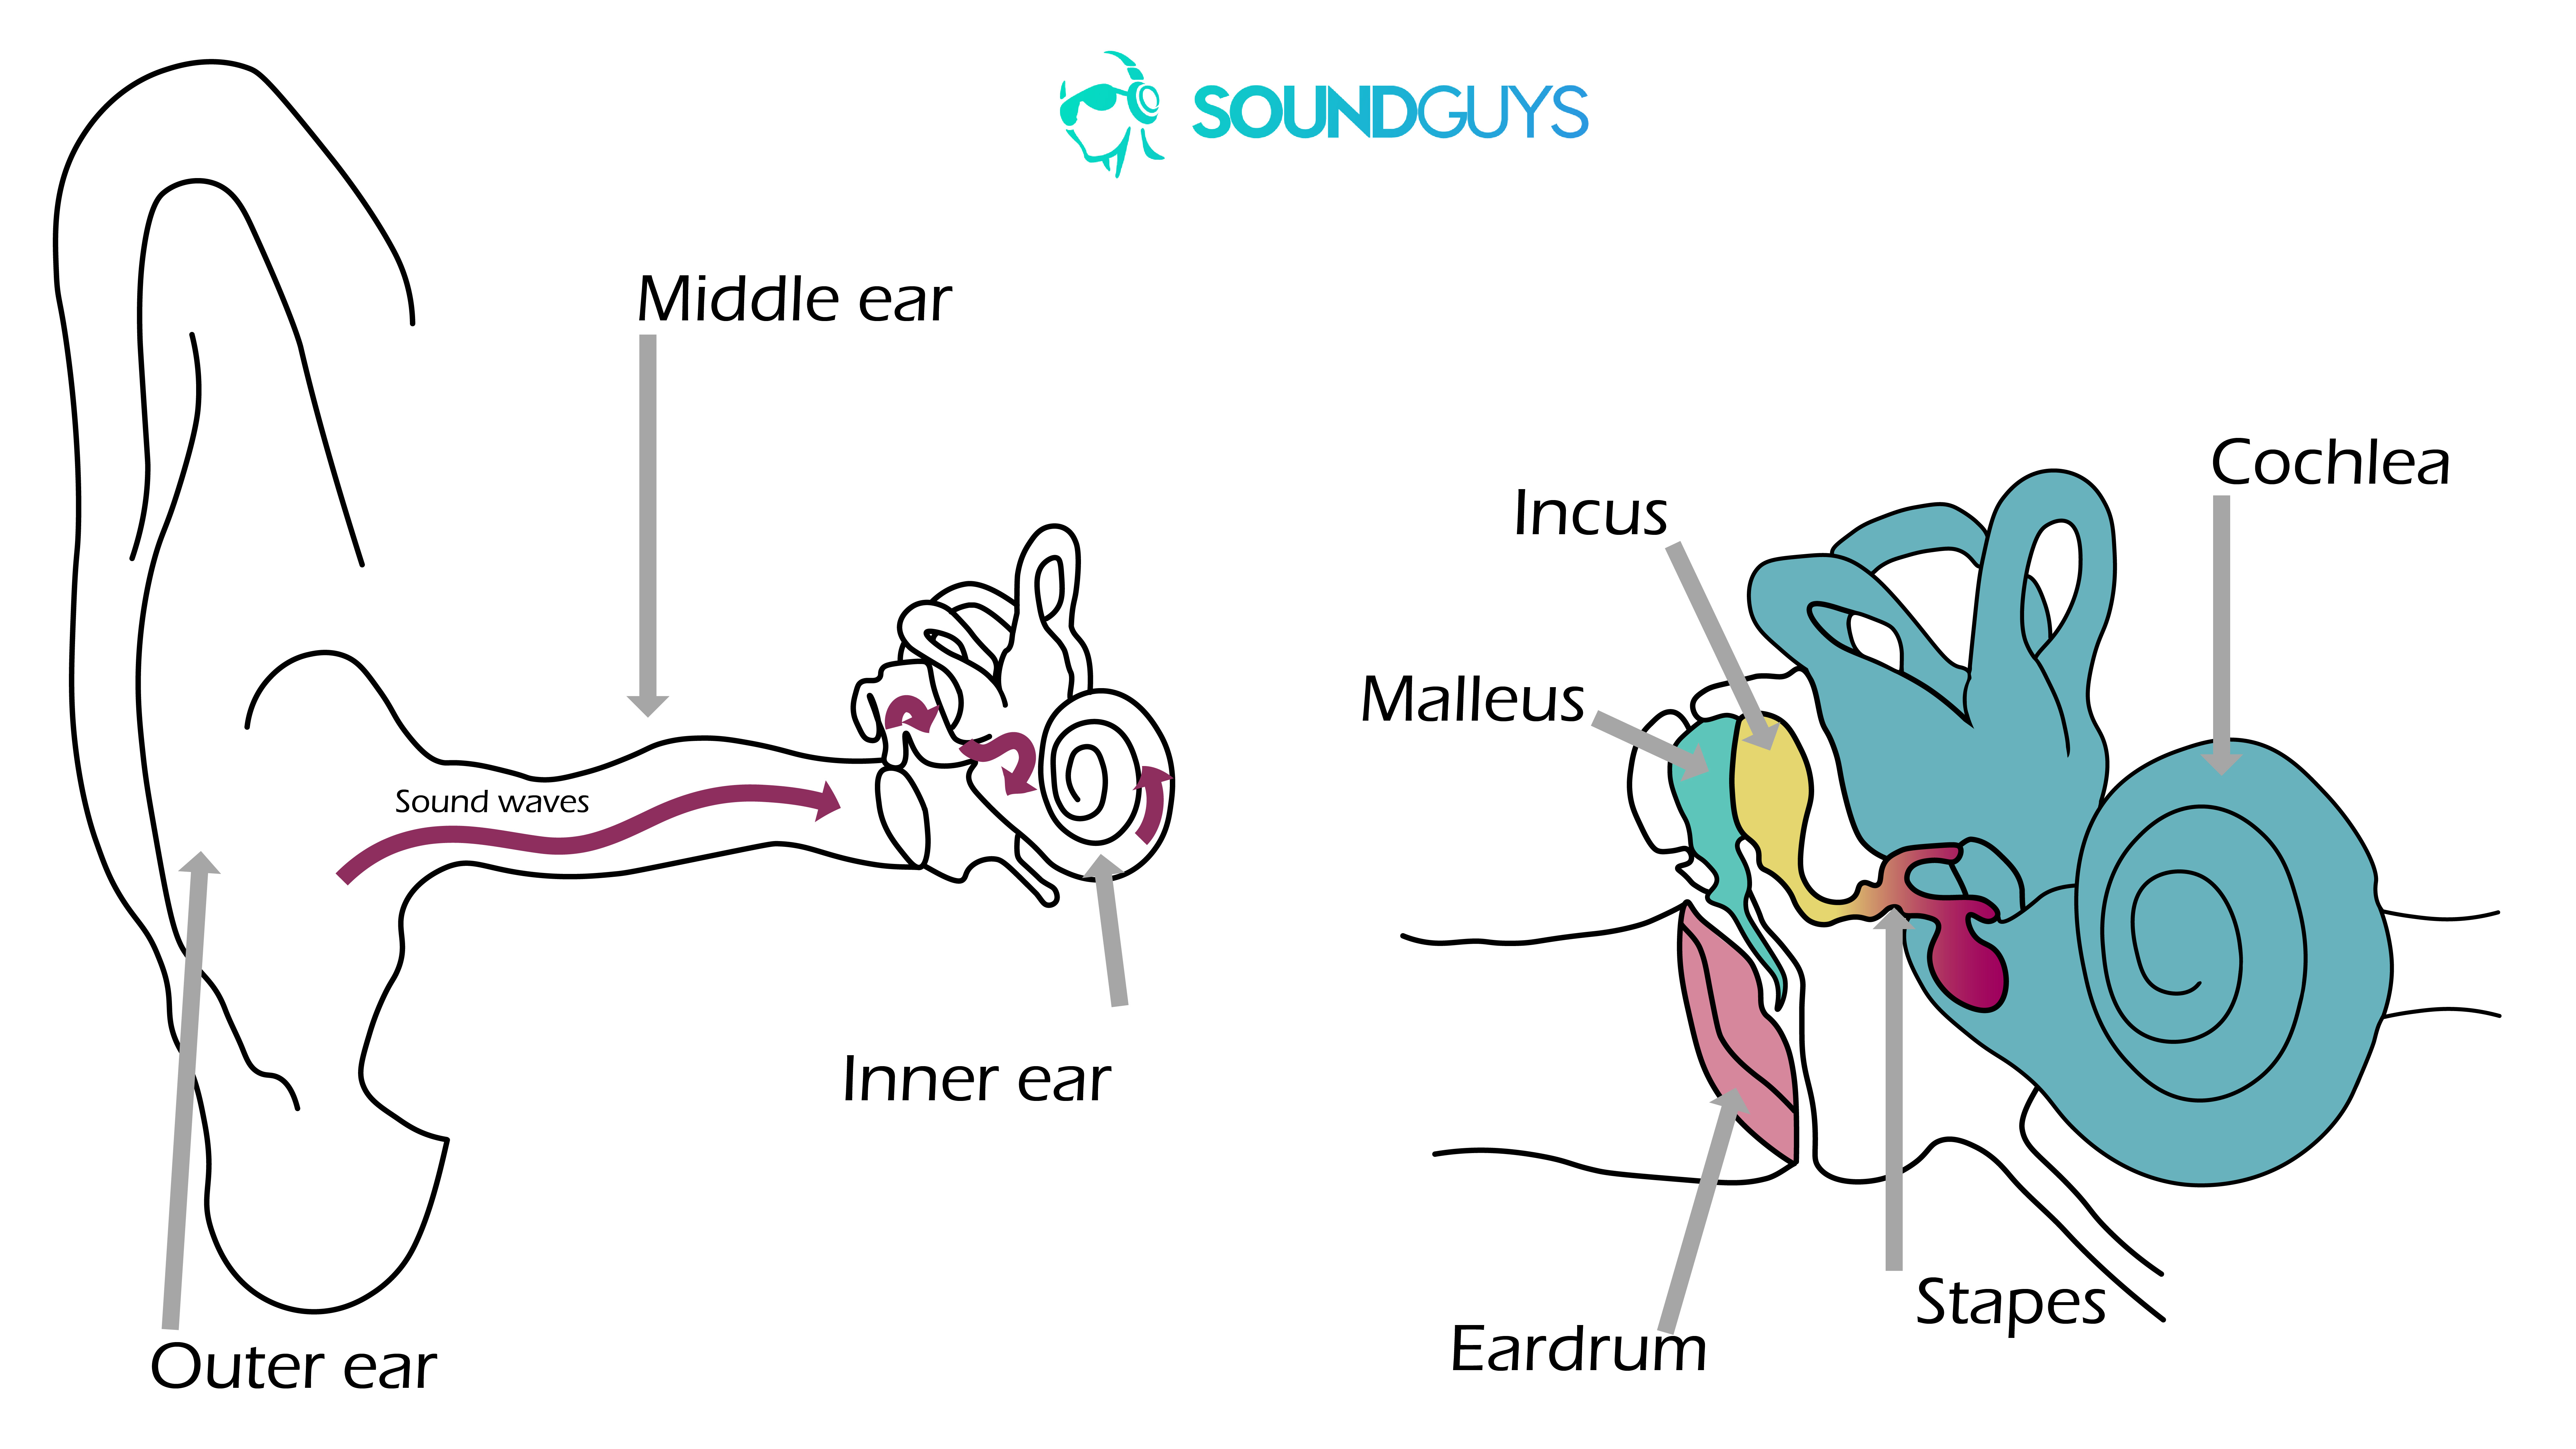 A diagram showing the anatomy of the ear. With bone conduction headphones, the sound bypasses the outer ear entirely.